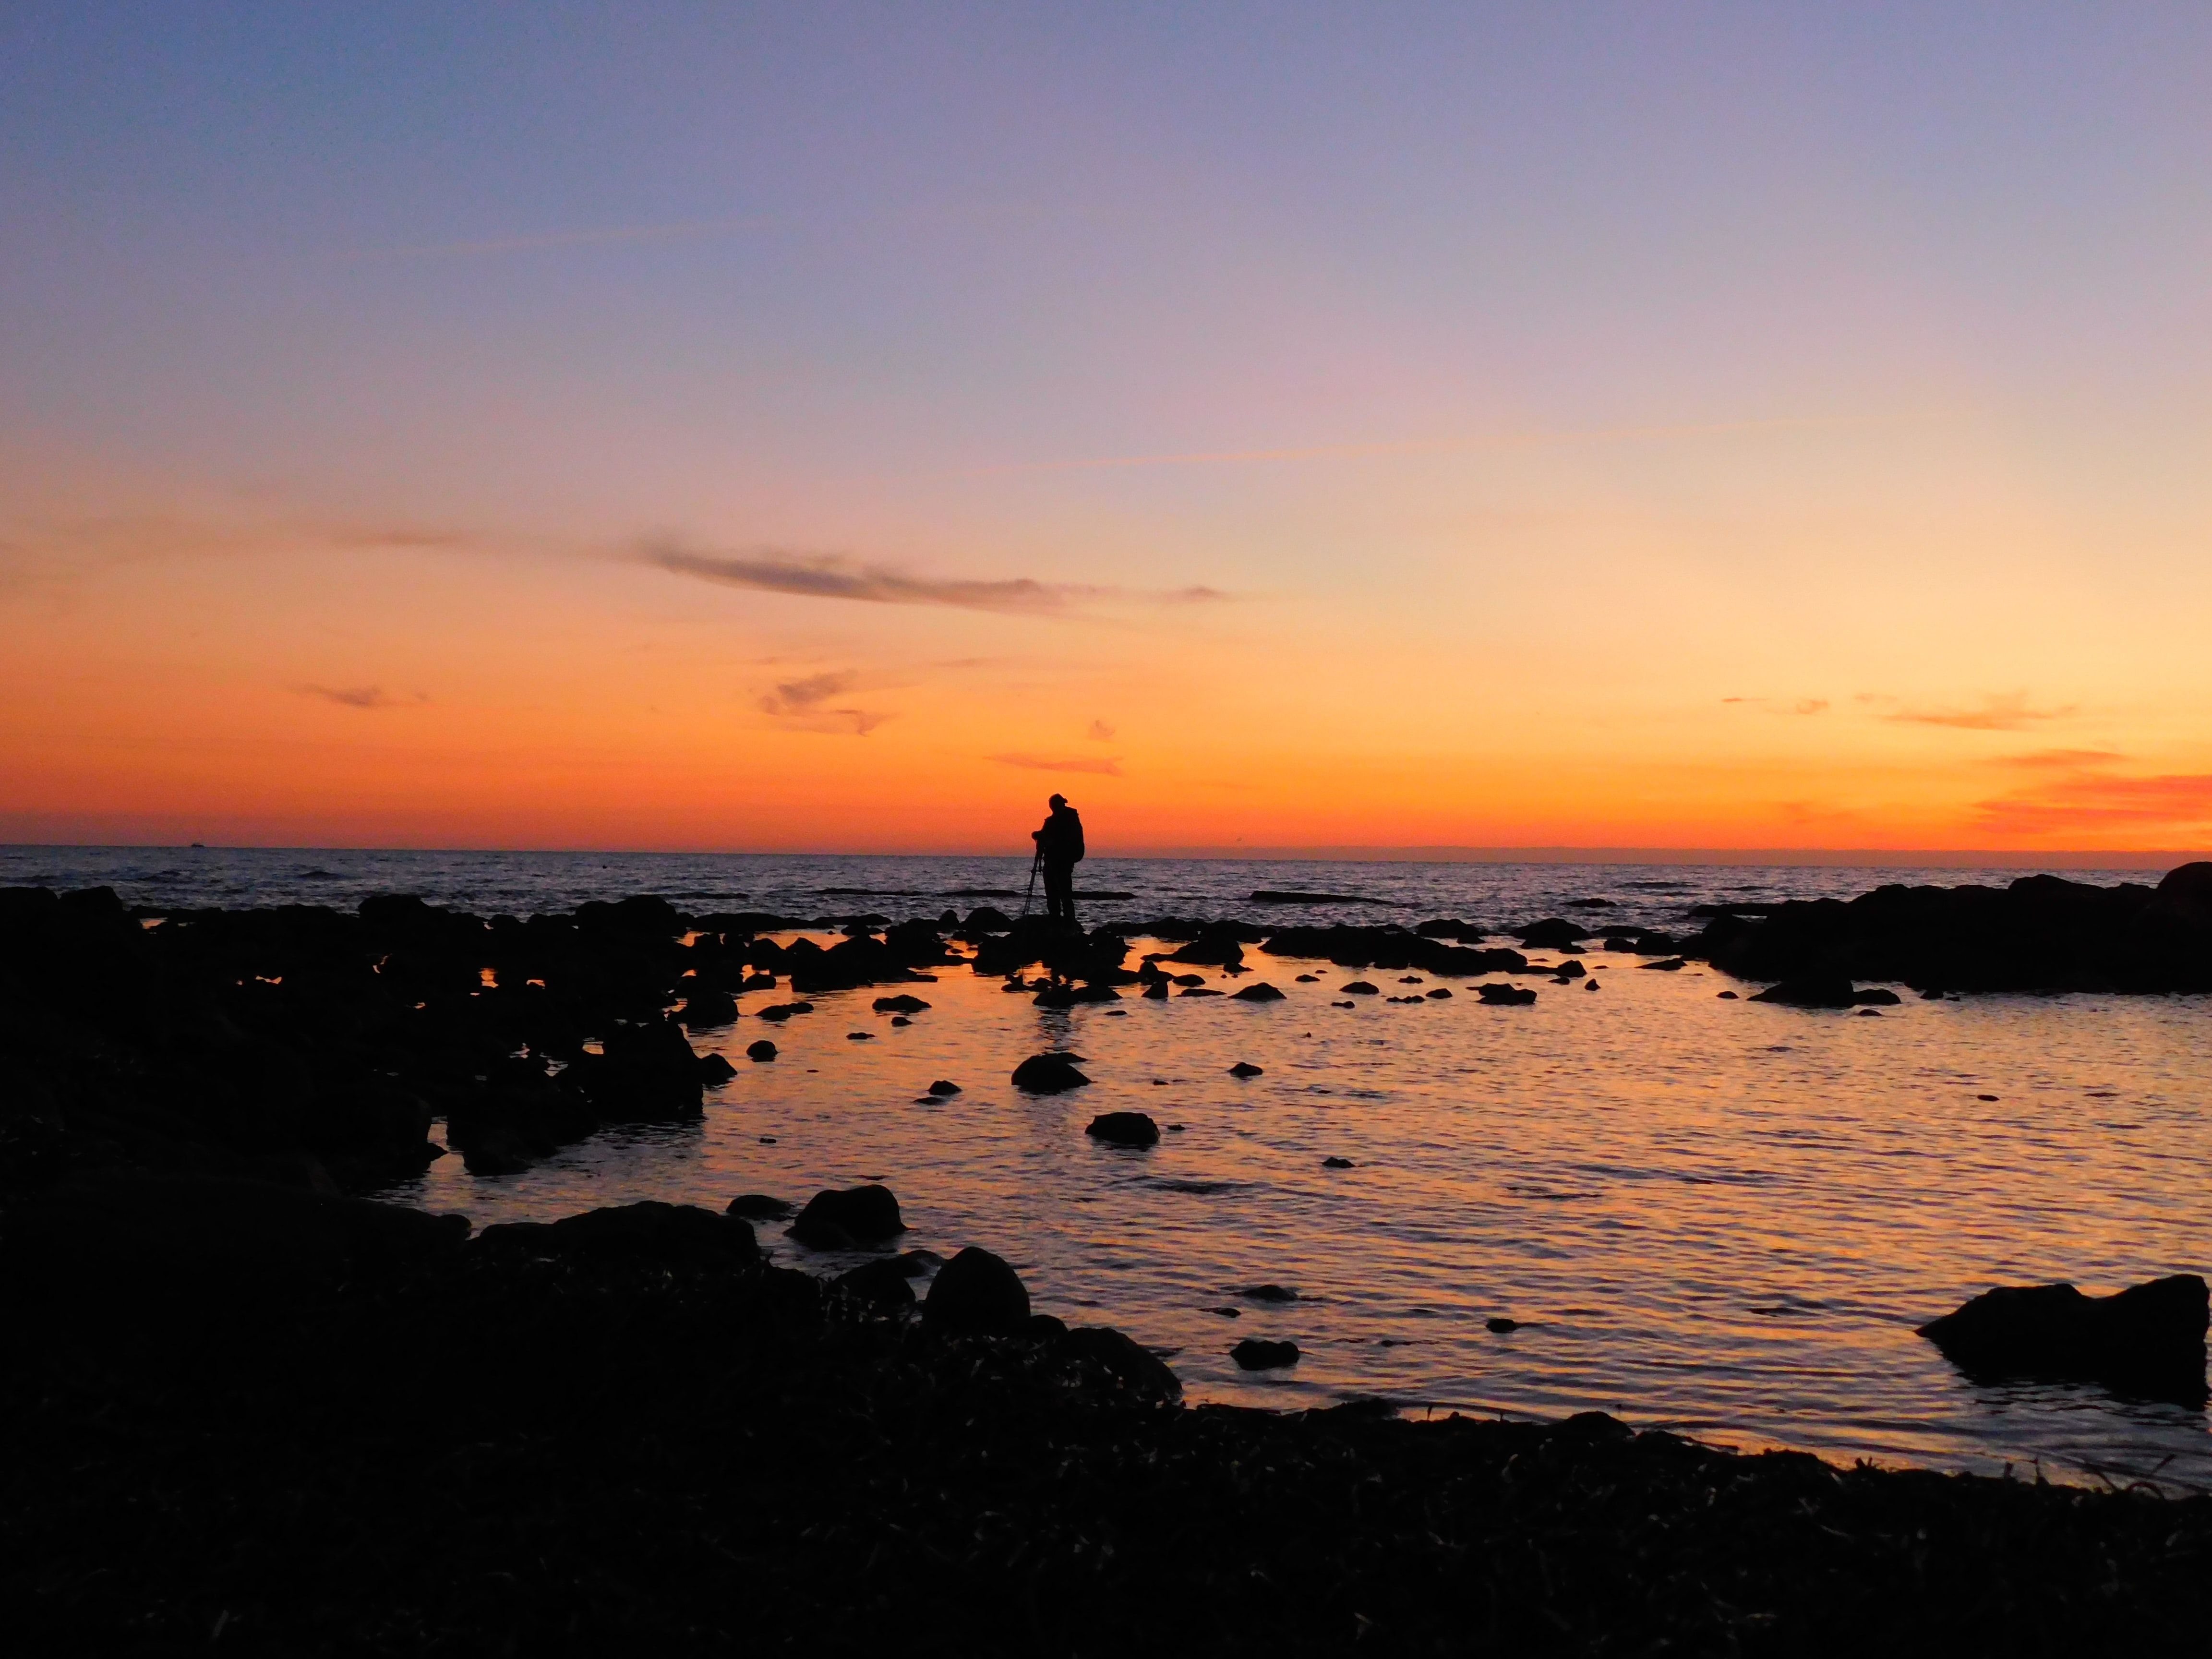 A person walking along the shore at sunset.